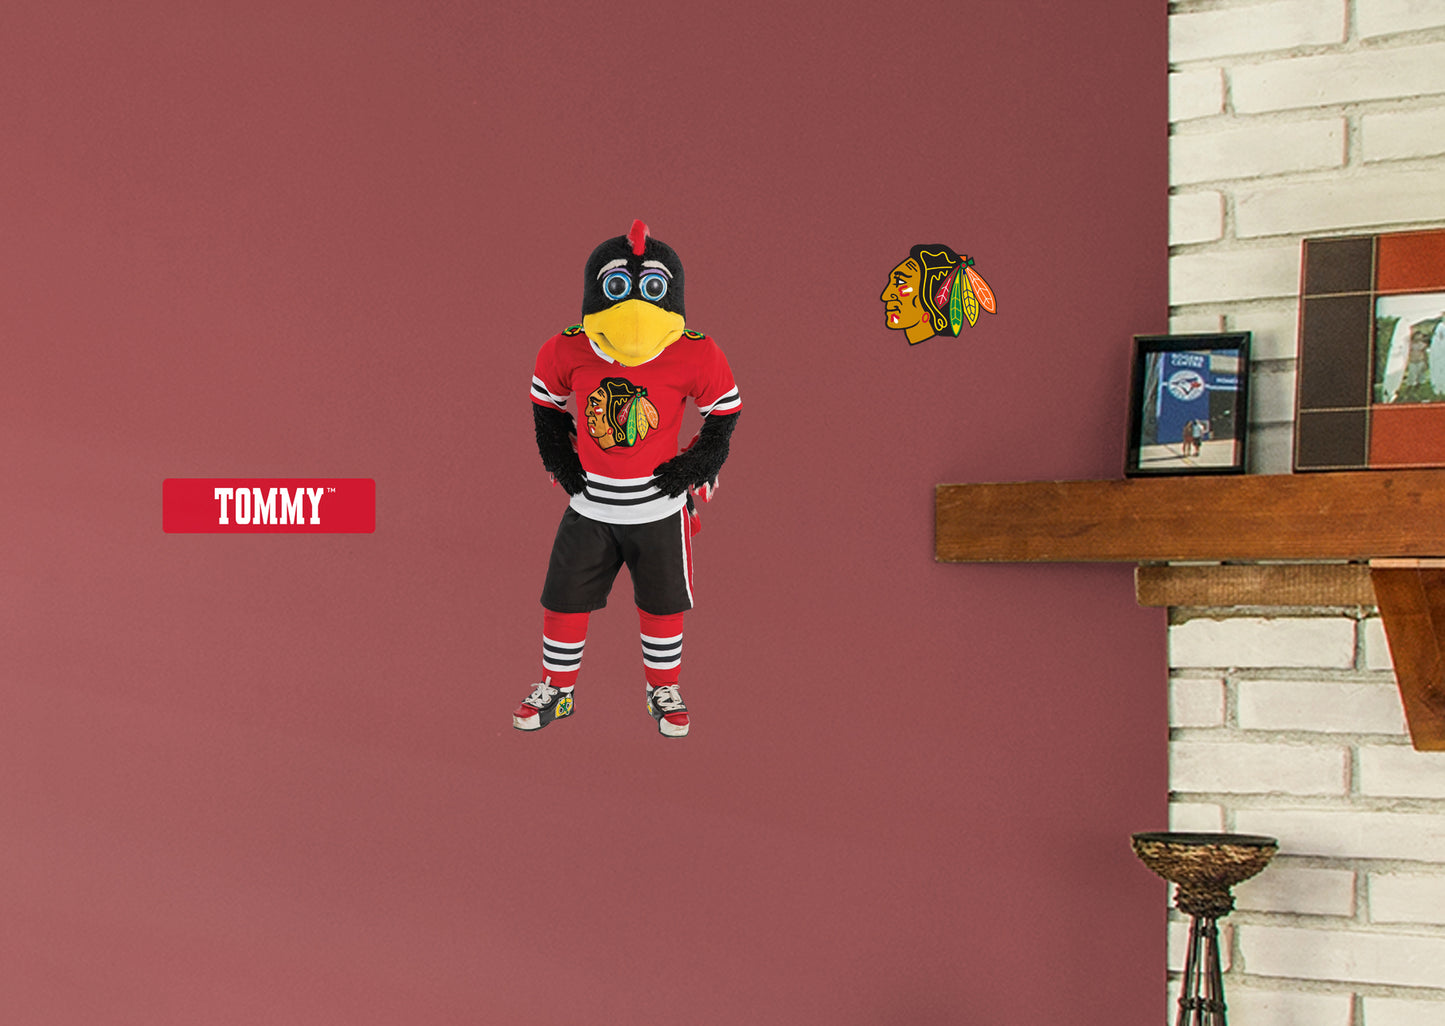 Chicago Blackhawks: Tommy Hawk  Mascot        - Officially Licensed NHL Removable Wall   Adhesive Decal